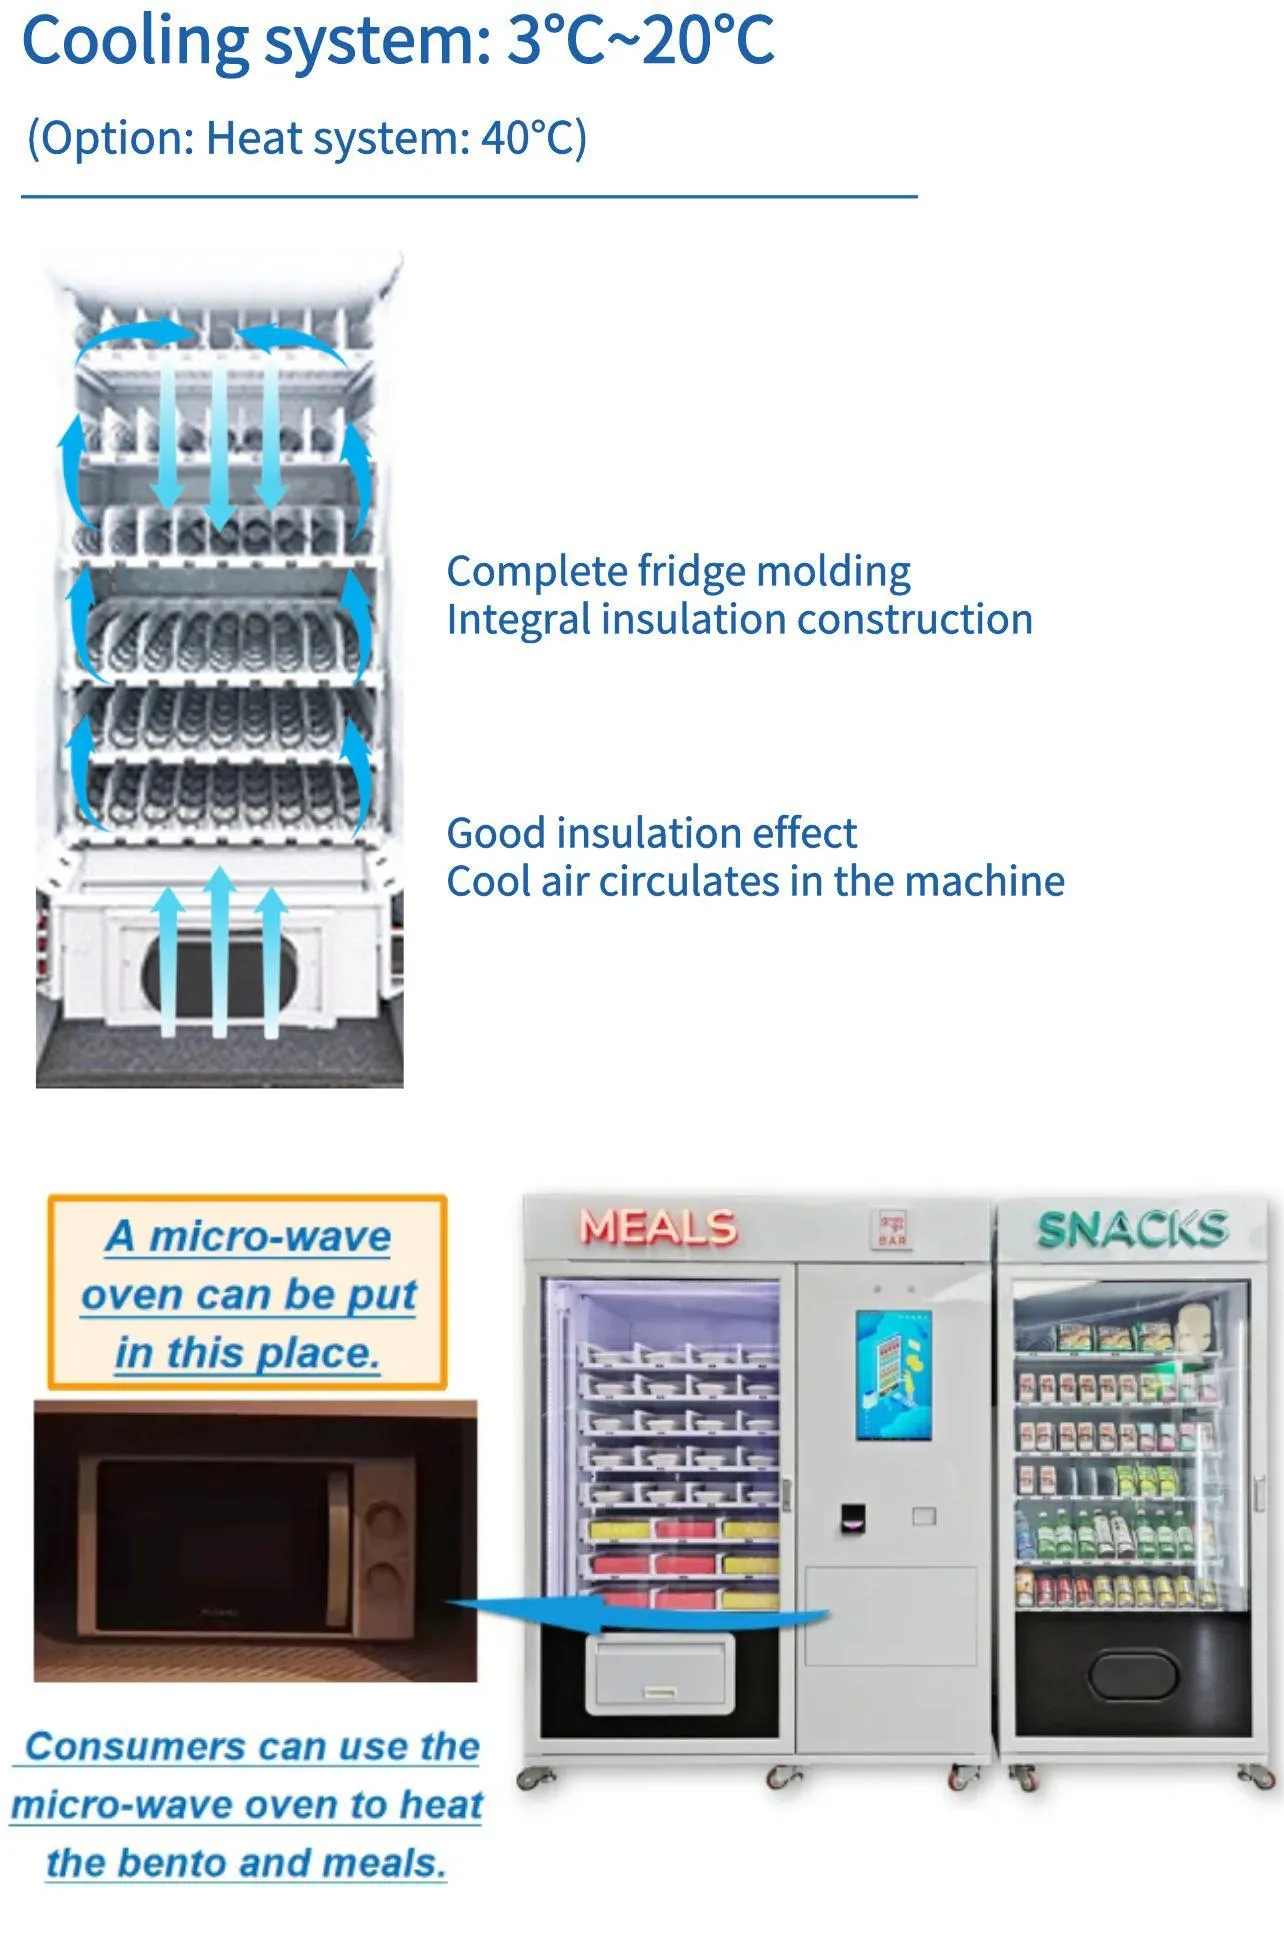 combo vending machine with big capacity and microwave oven to sell hot food meal snack drink, it can hold 250 drinks, 30 snacks and 107 meal boxes